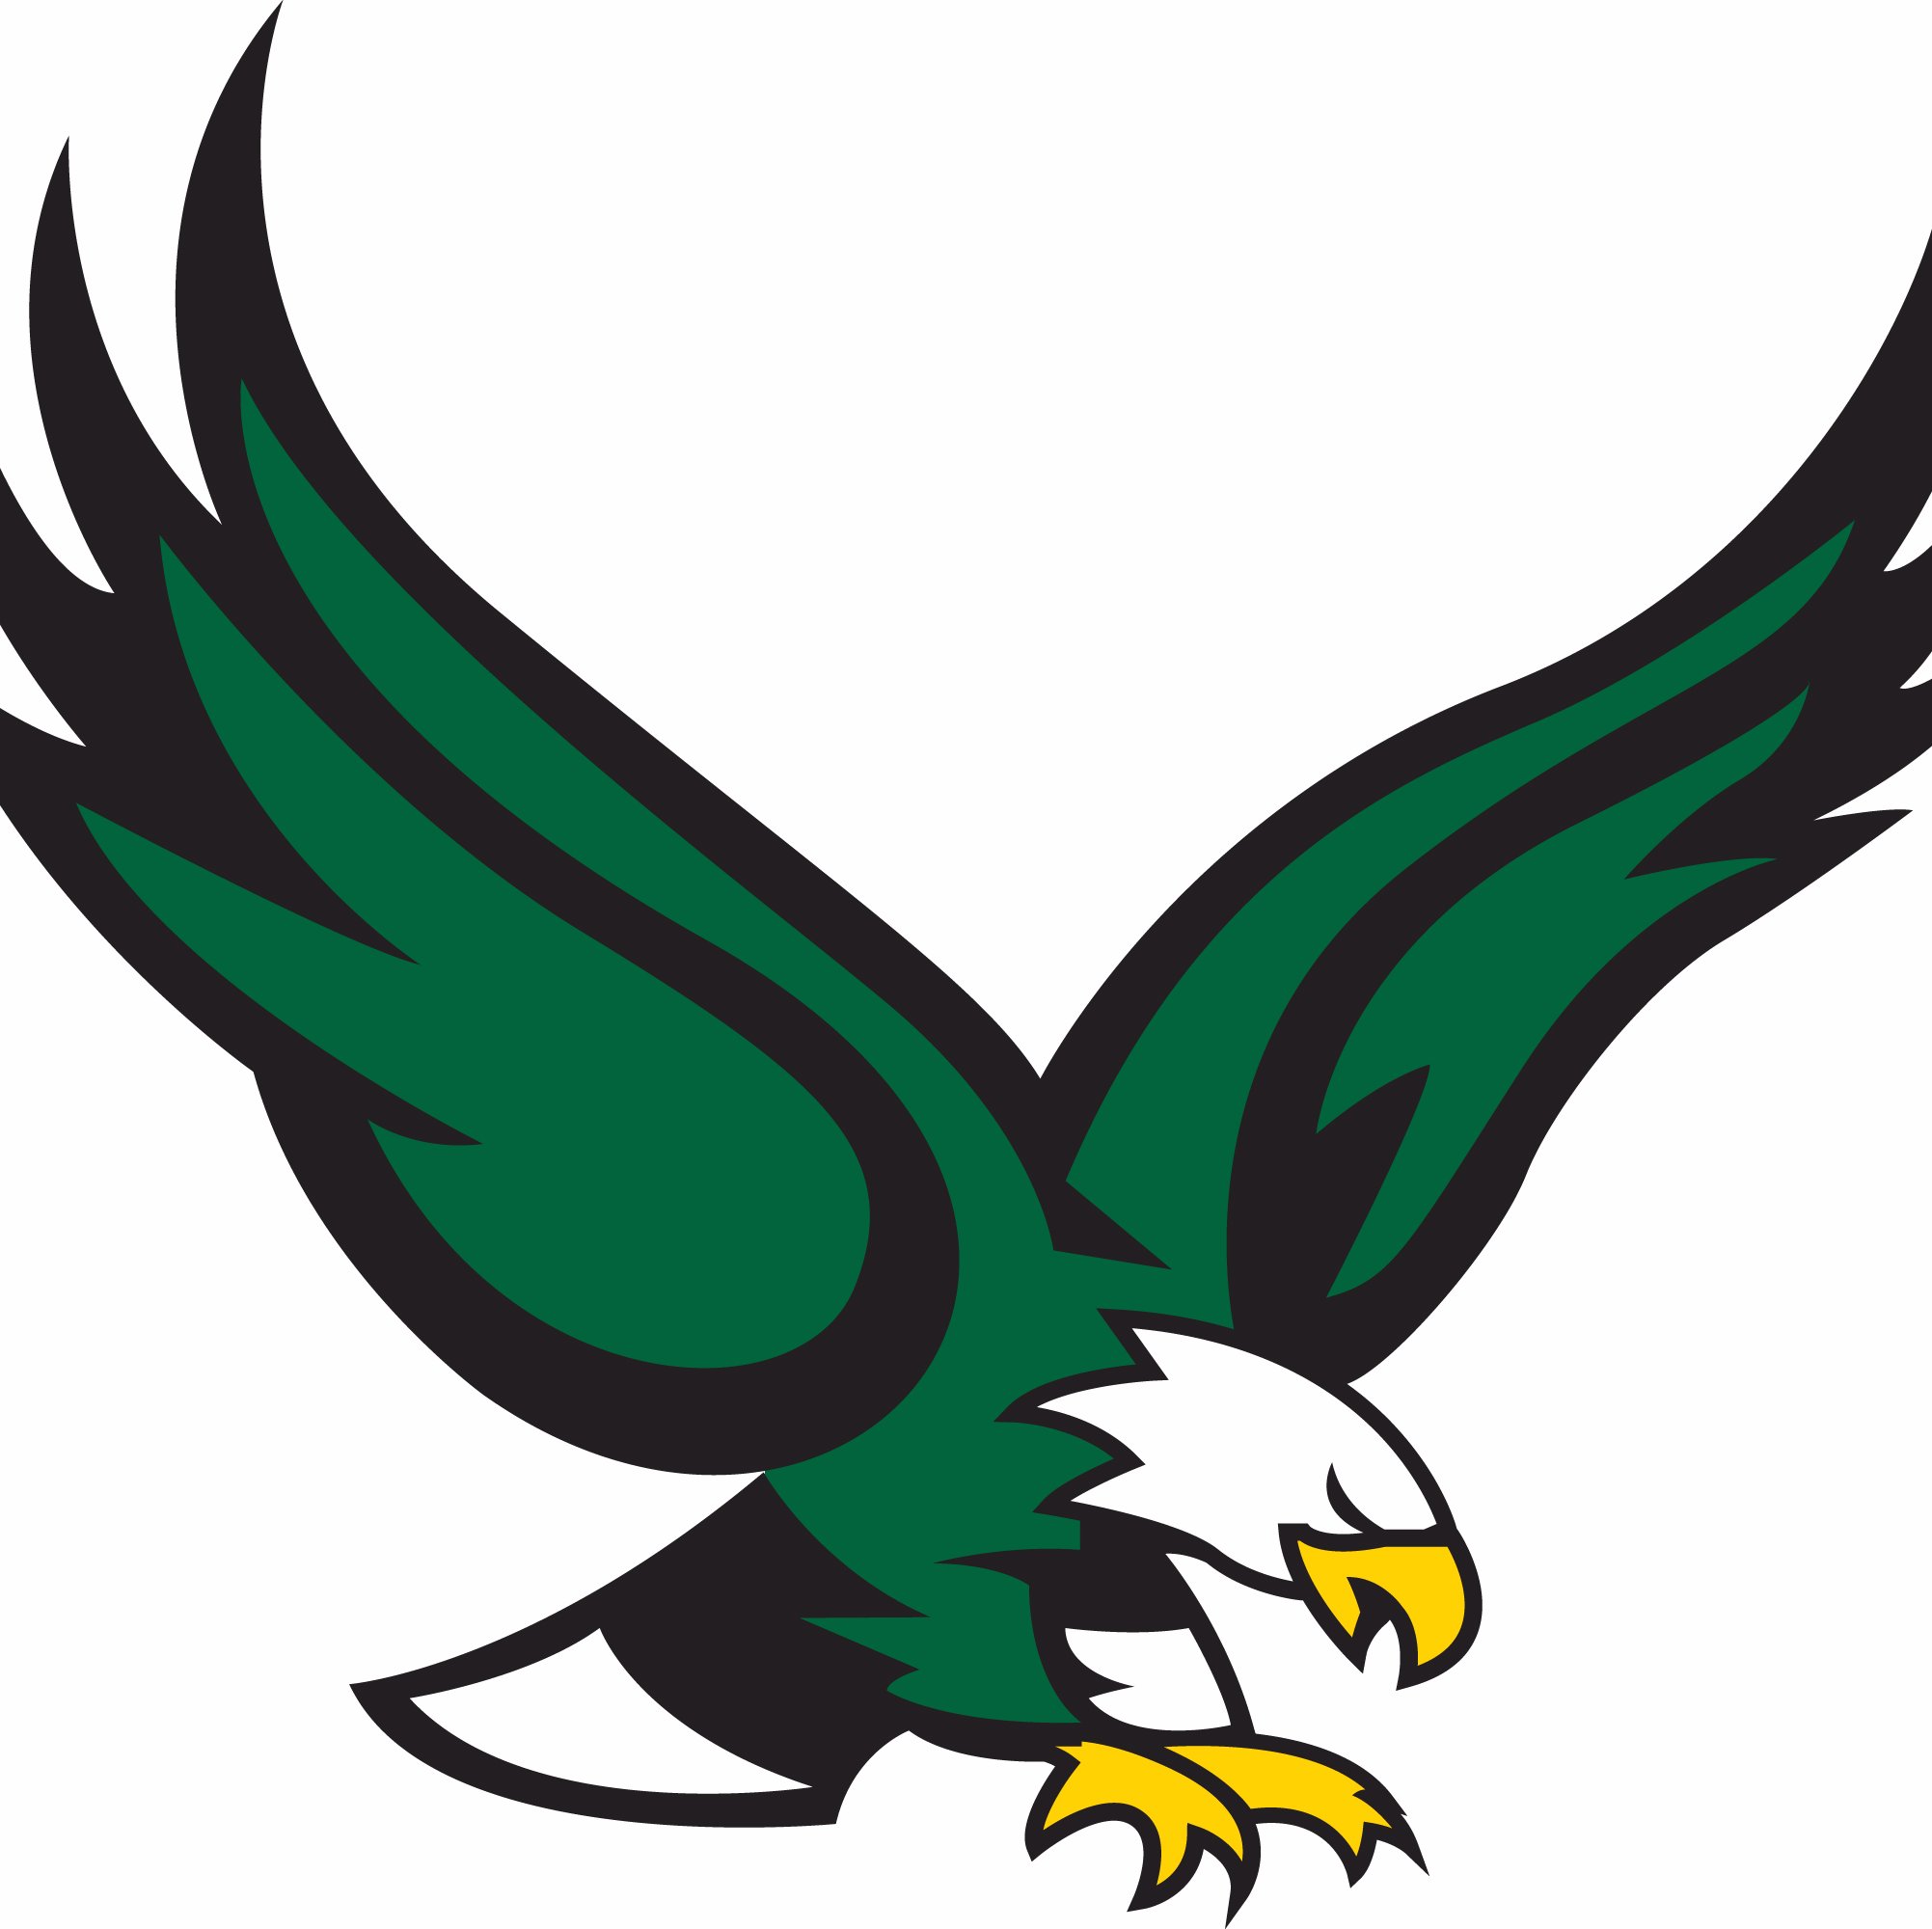 Welcome to the official Twitter page for the Tongue River Eagles! We are part of Sheridan County School District #1.